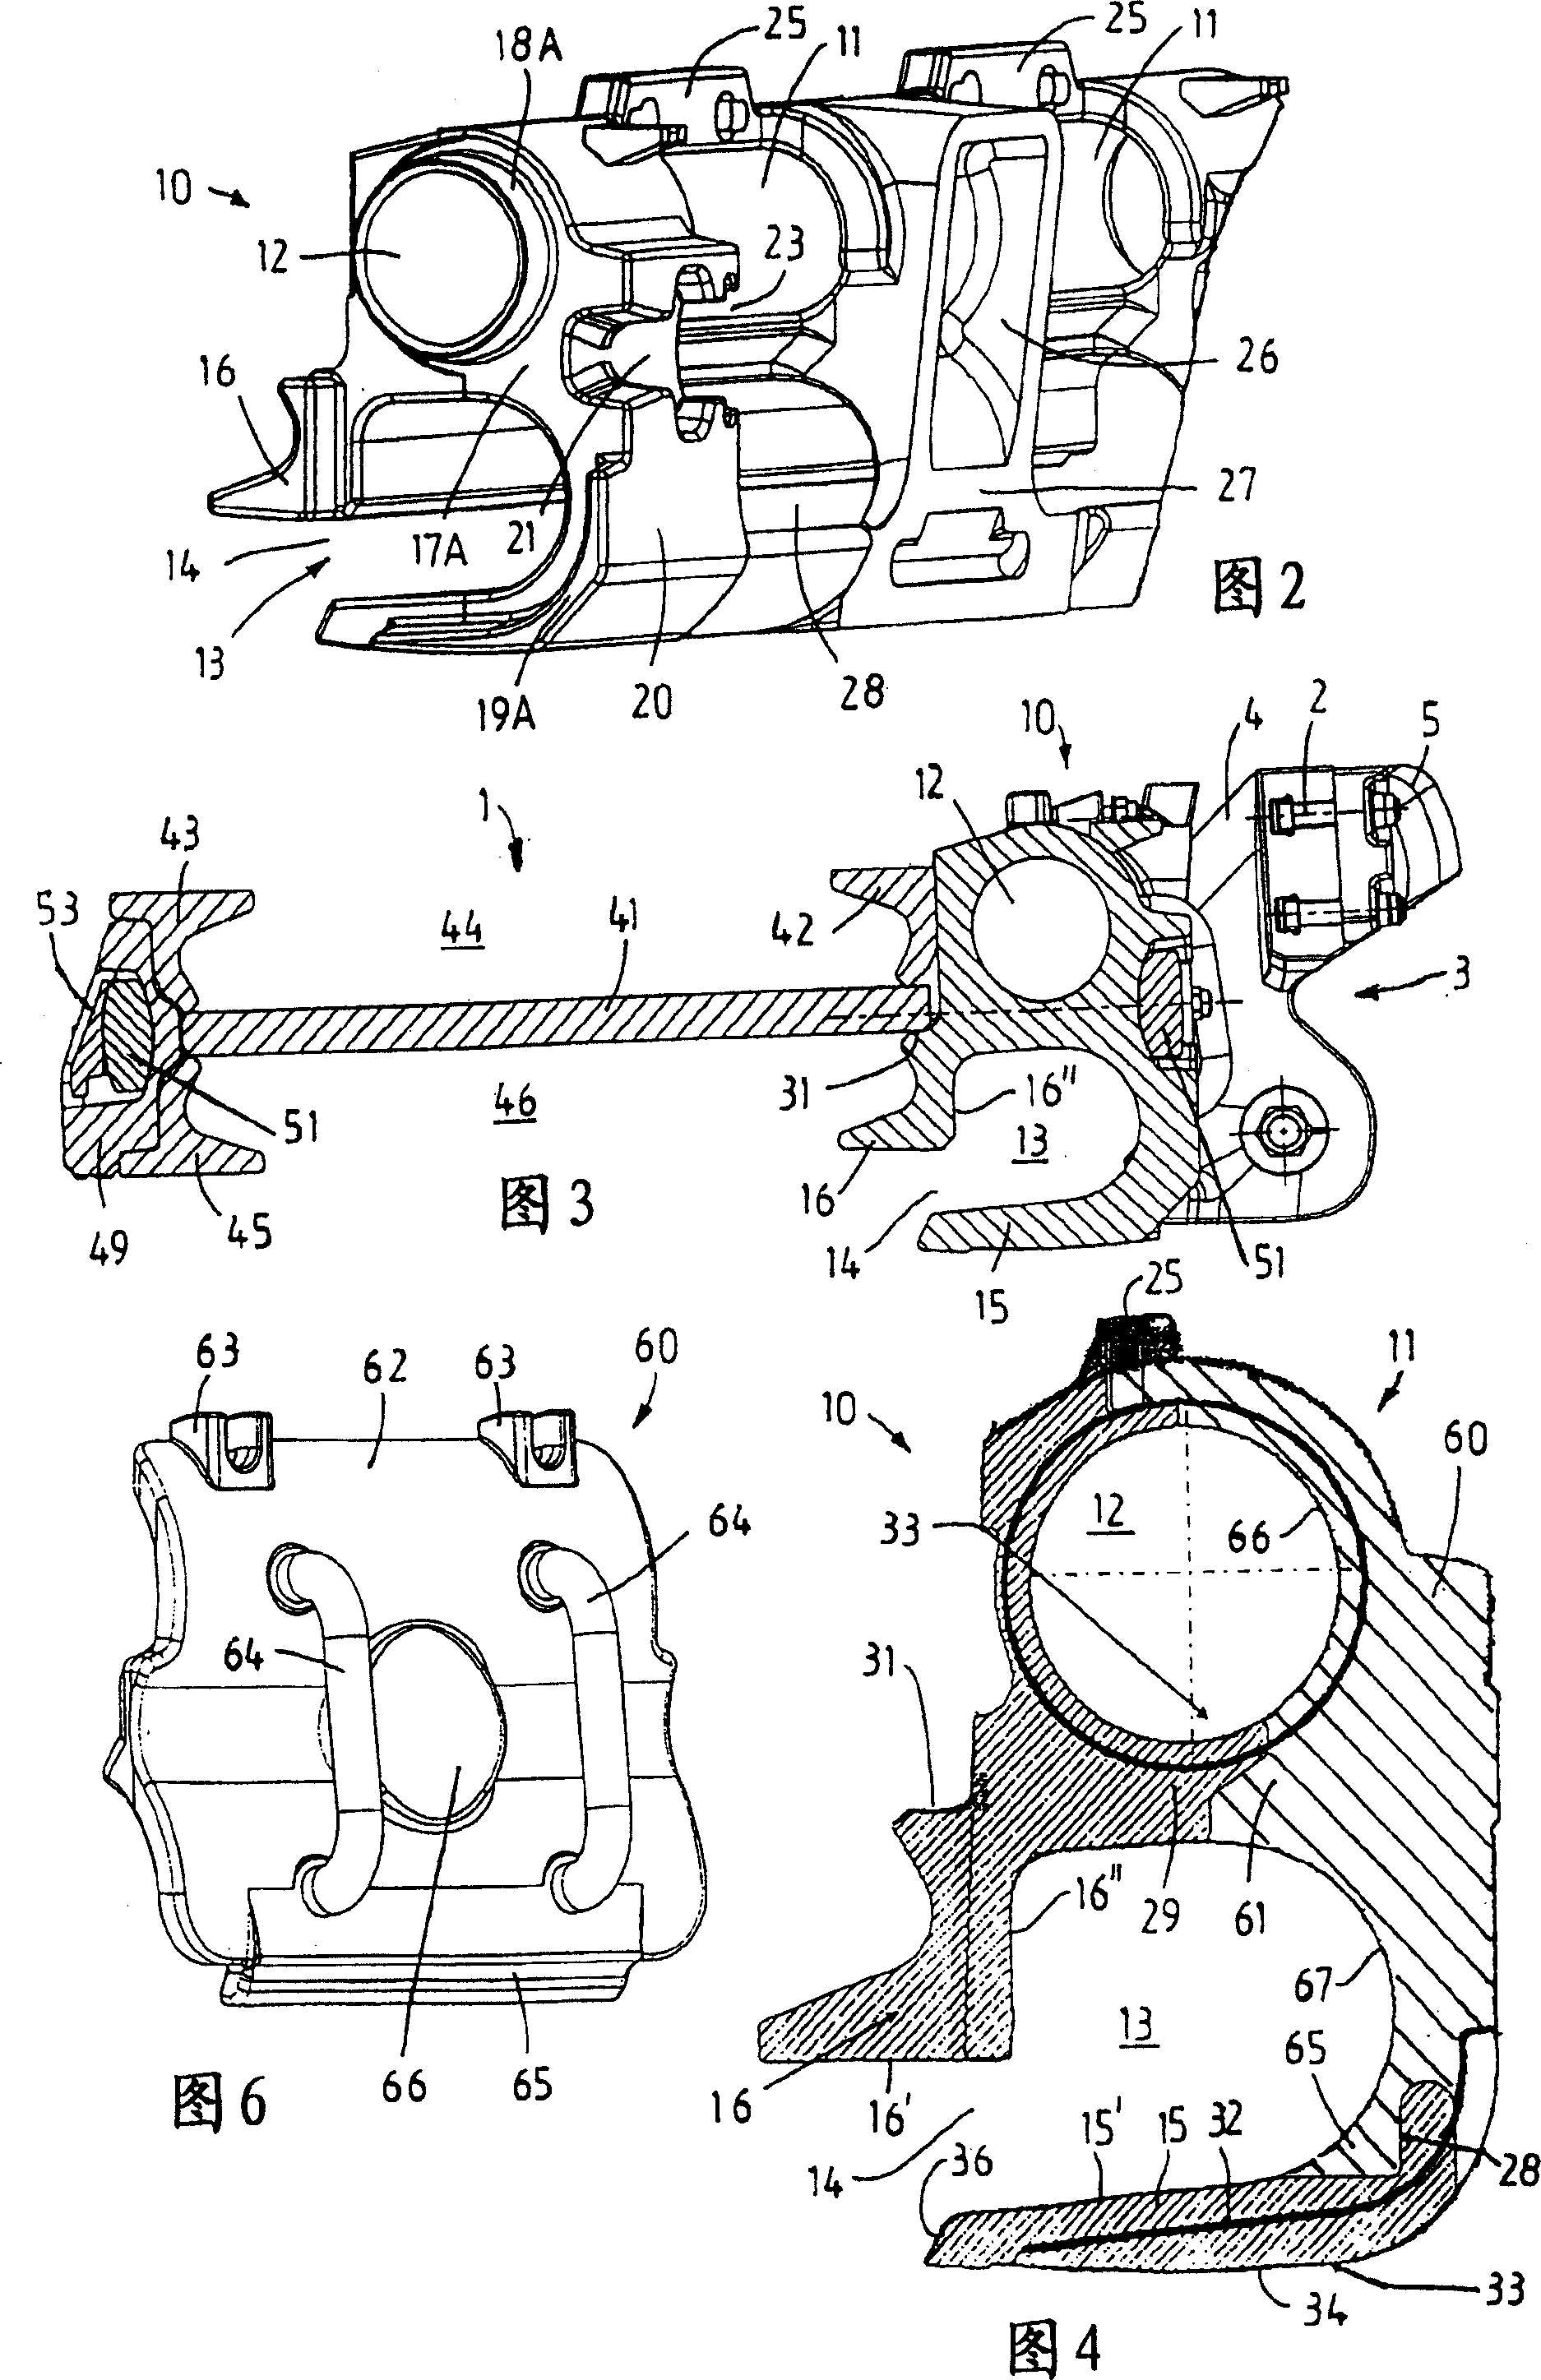 Guiding device for guiding a chain-drawn sword plane